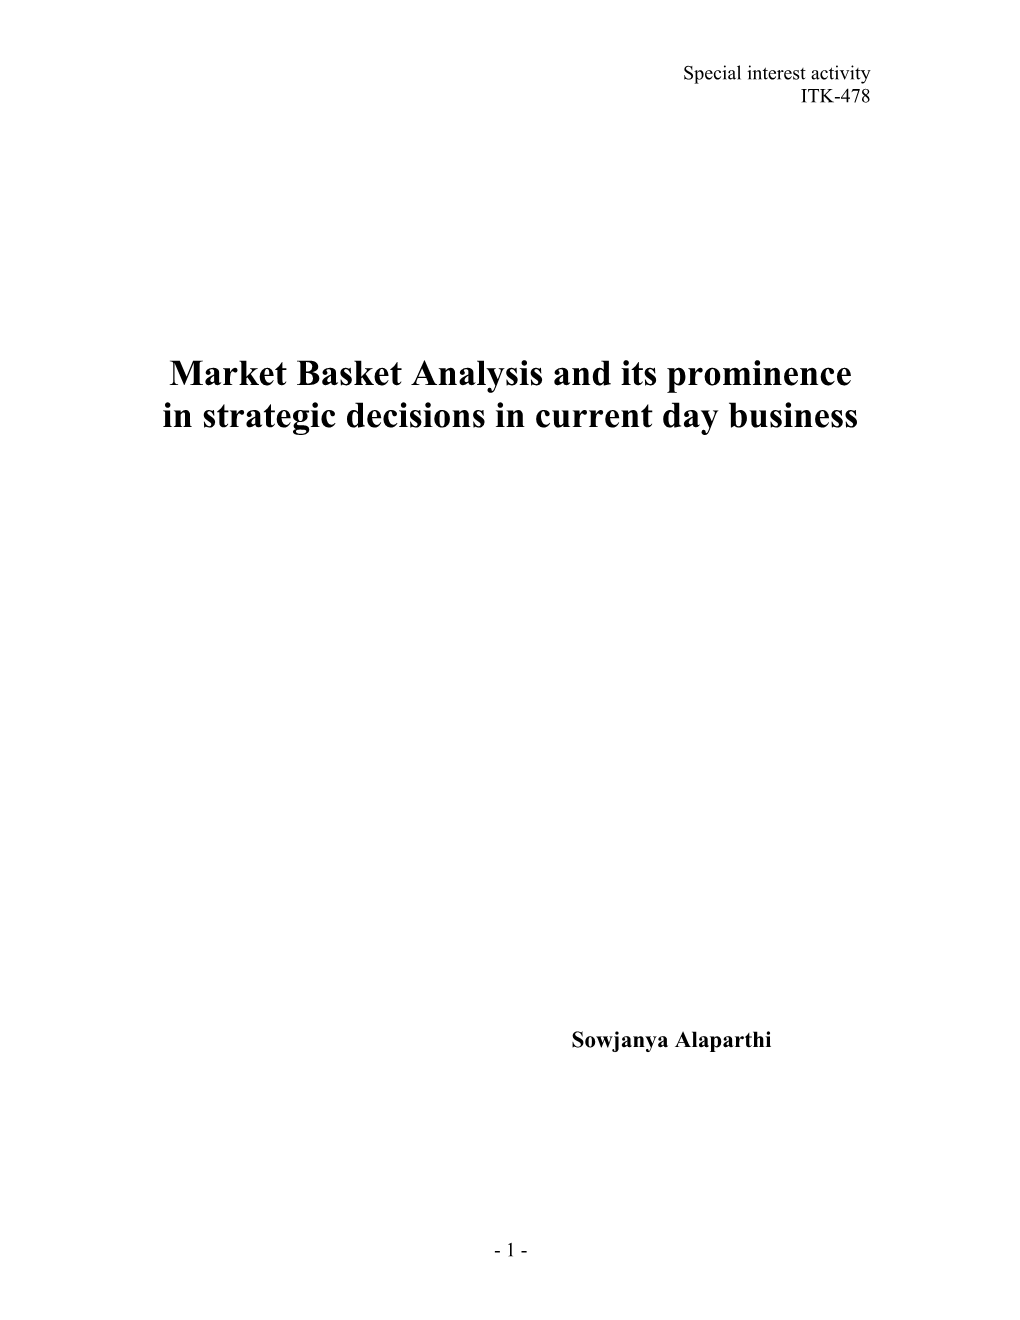 Market Basket Analysis and Its Prominence in Strategic Decisions in Current Day Business